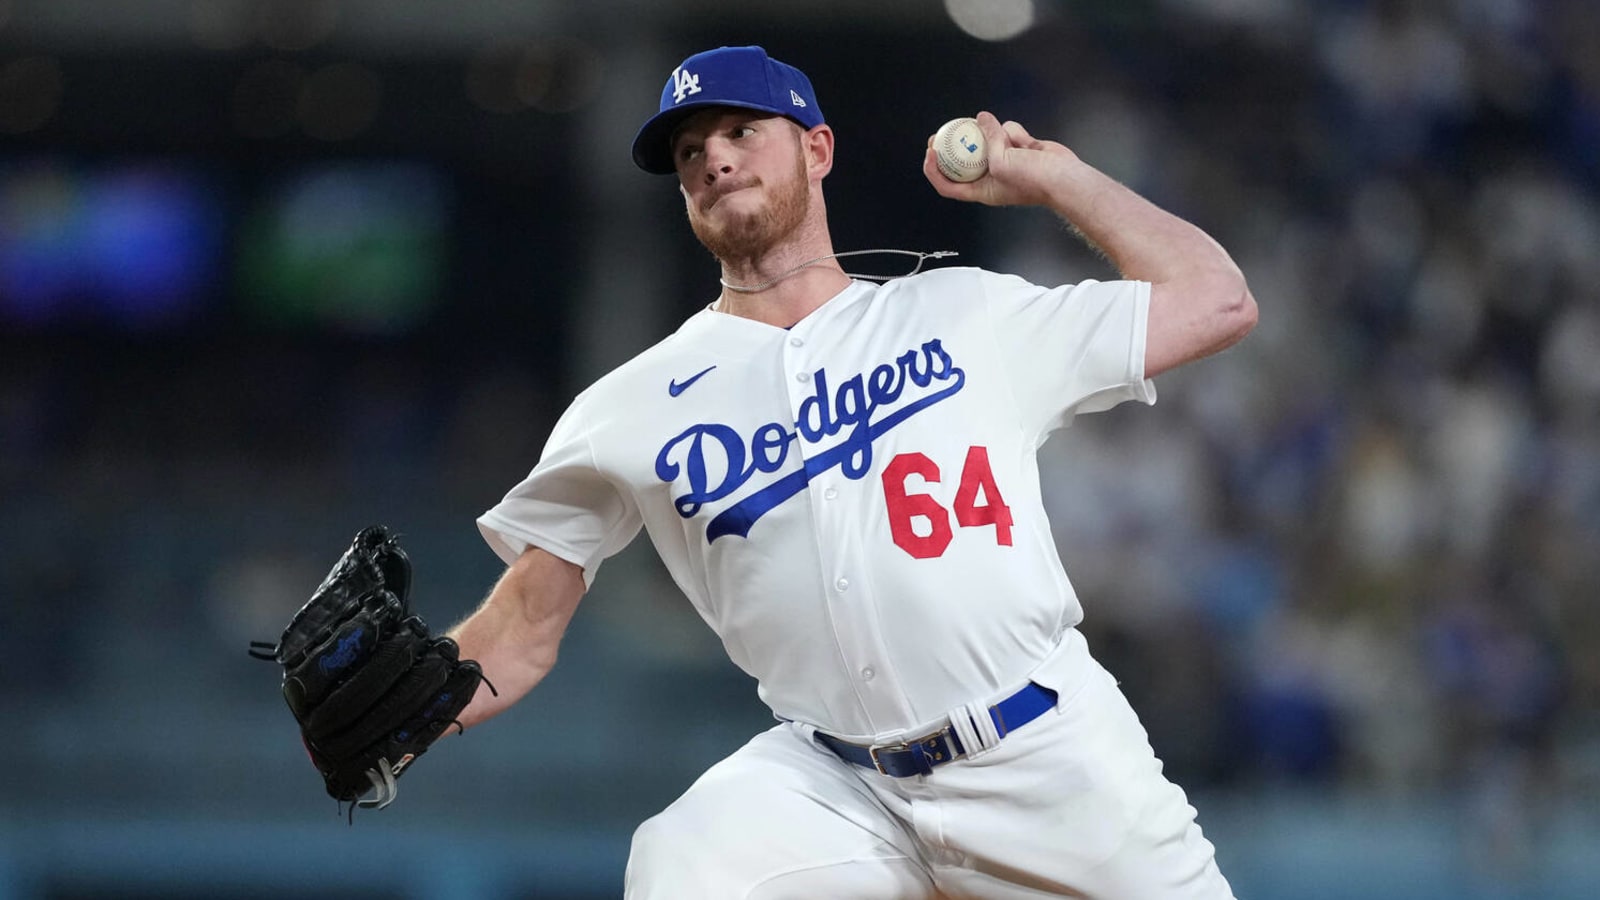 Yankees to acquire LHP Caleb Ferguson from Dodgers